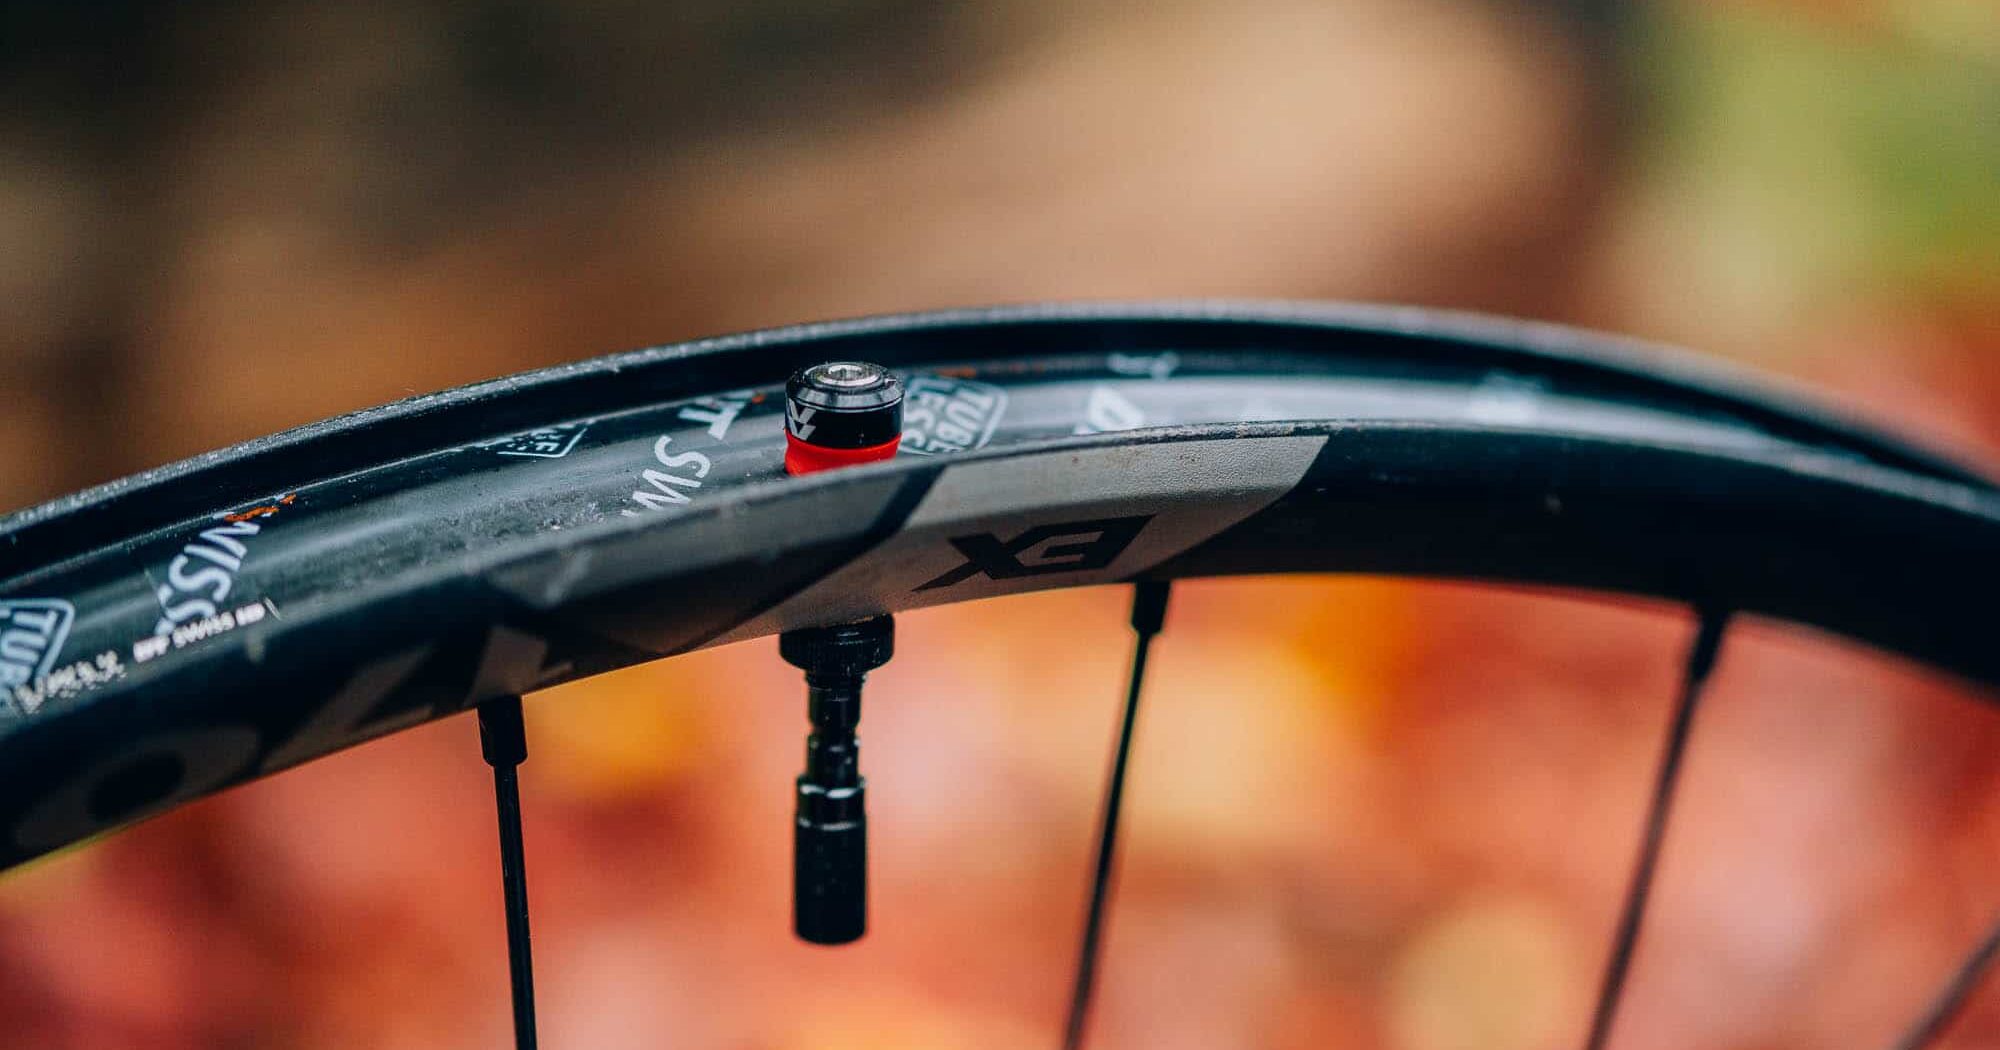 Bike Tire Keeps Going Flat, but No Puncture: Reasons and Solutions